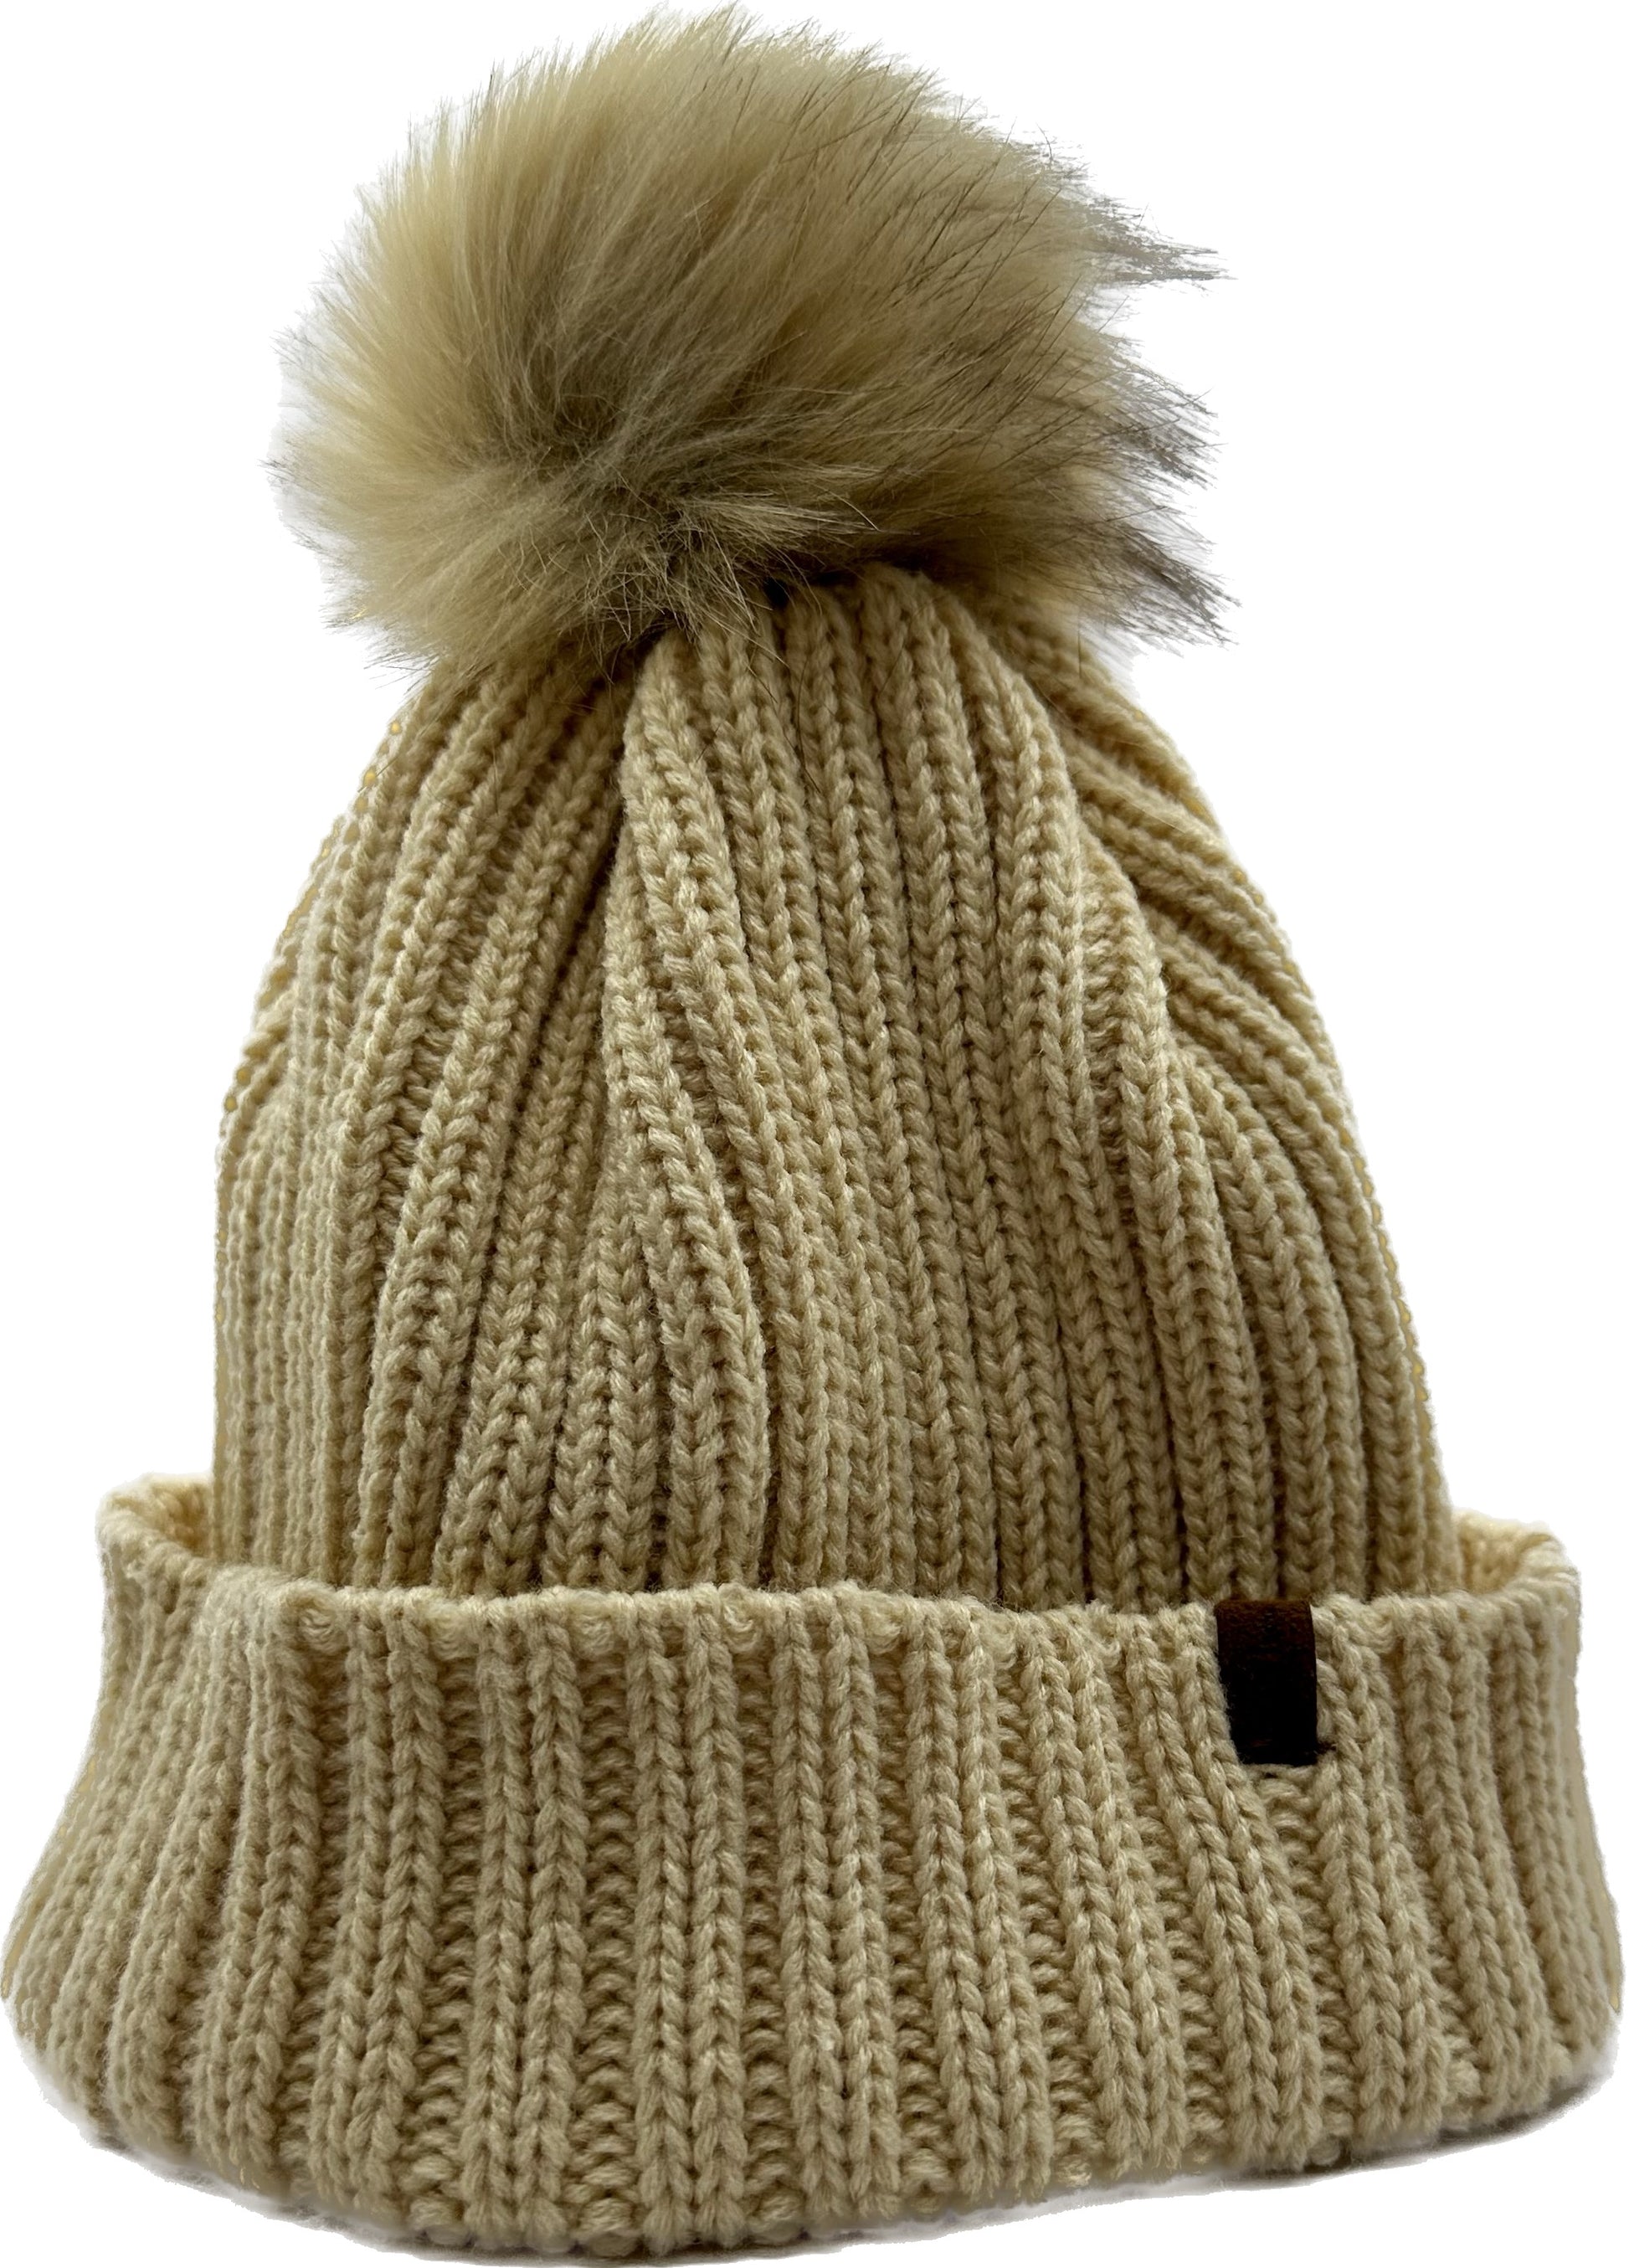 THE KNIT BEANIE IN CHAMPAGNE - COSI & co.